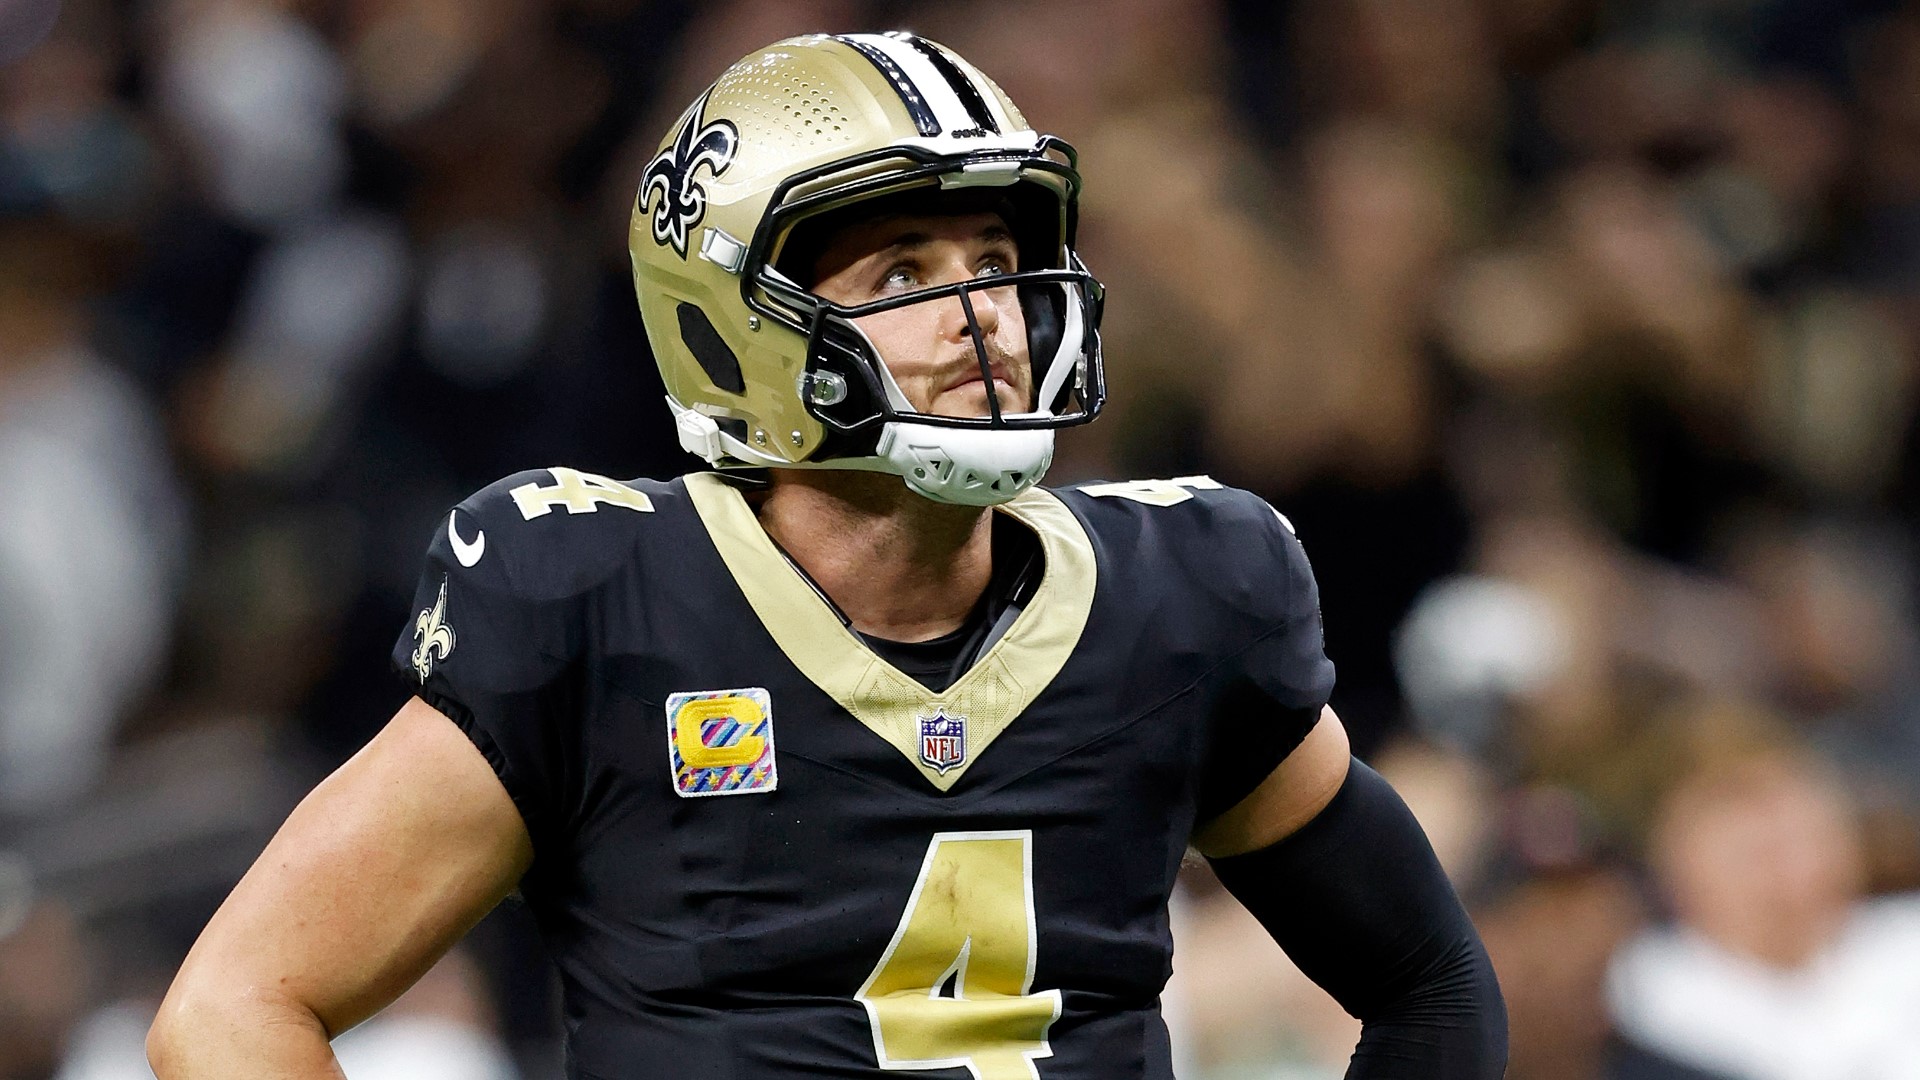 WWL-TV sports director Doug Mouton shares his '4 Takeaways' from the Saints' Week 7 loss to the Jaguars.